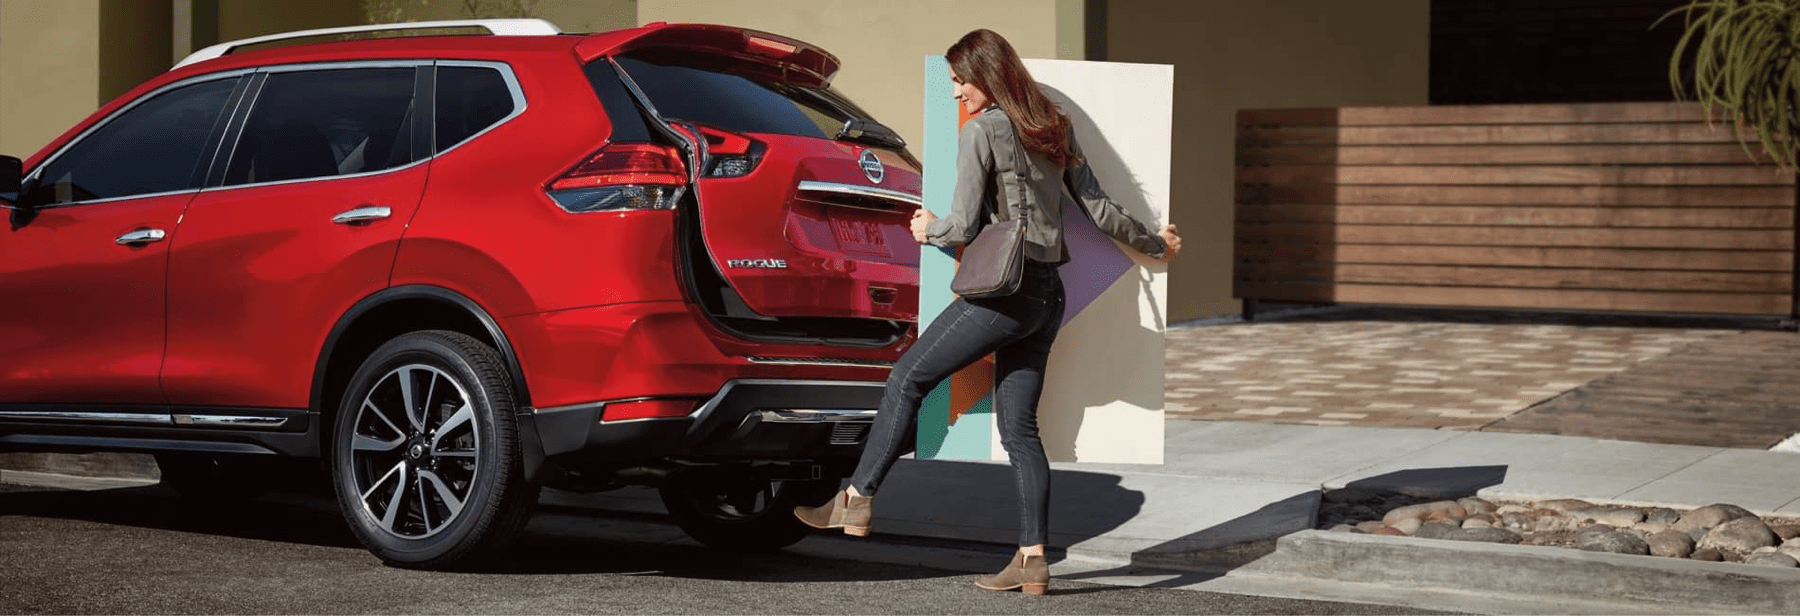 woman opens Nissan rogue liftgate with foot